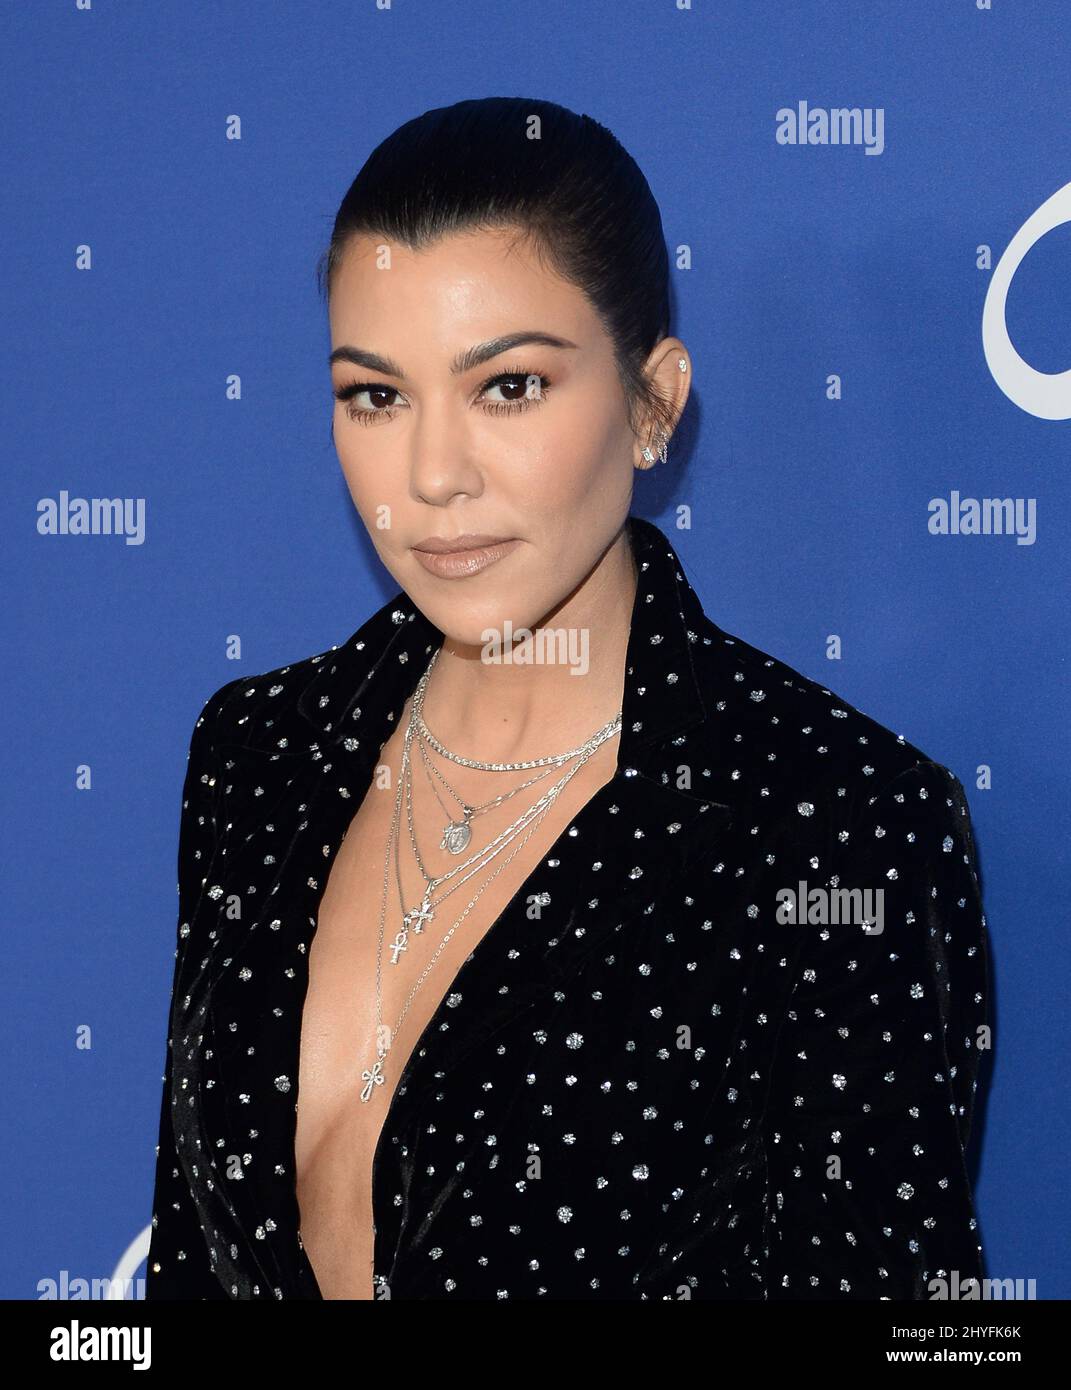 Kourtney Kardashian at the 2018 CFDA Fashion Awards held at the Brooklyn Museum on June 4, 2018 in Brooklyn, NY Stock Photo